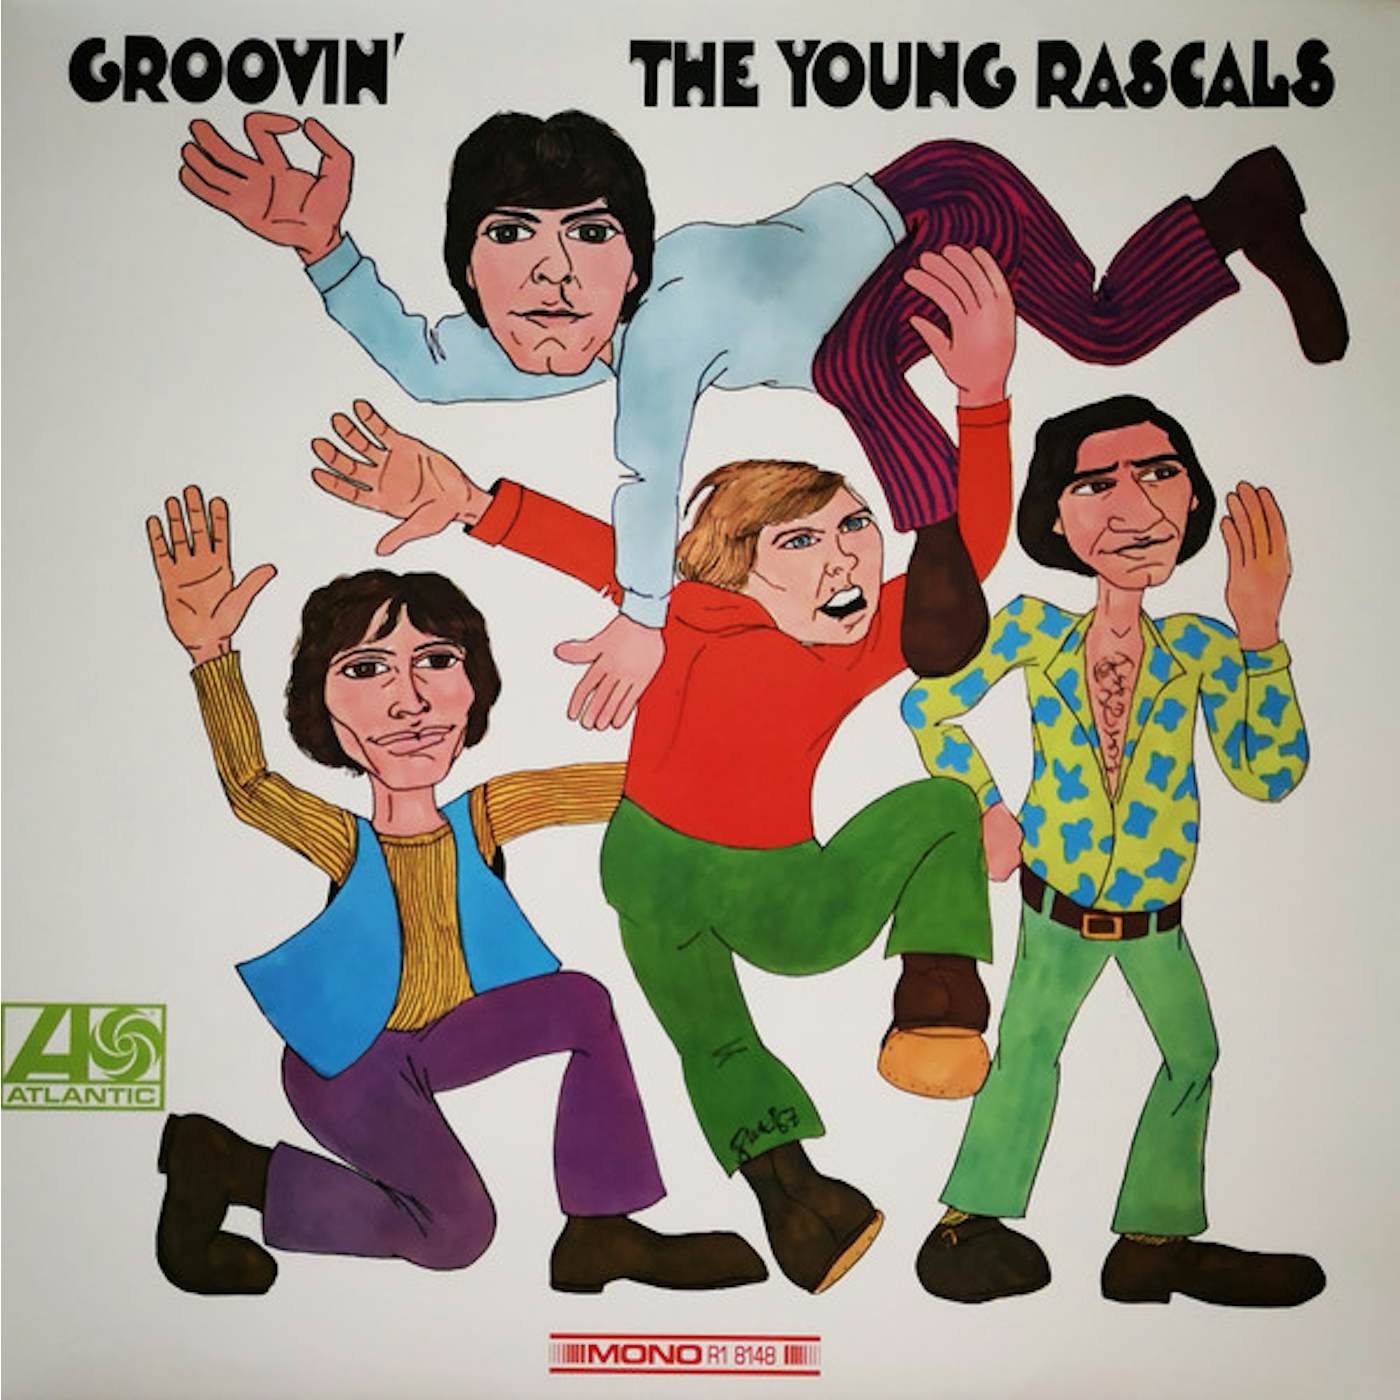 The Young Rascals GROOVIN (50TH ANNIVERSARY EDITION) Vinyl Record